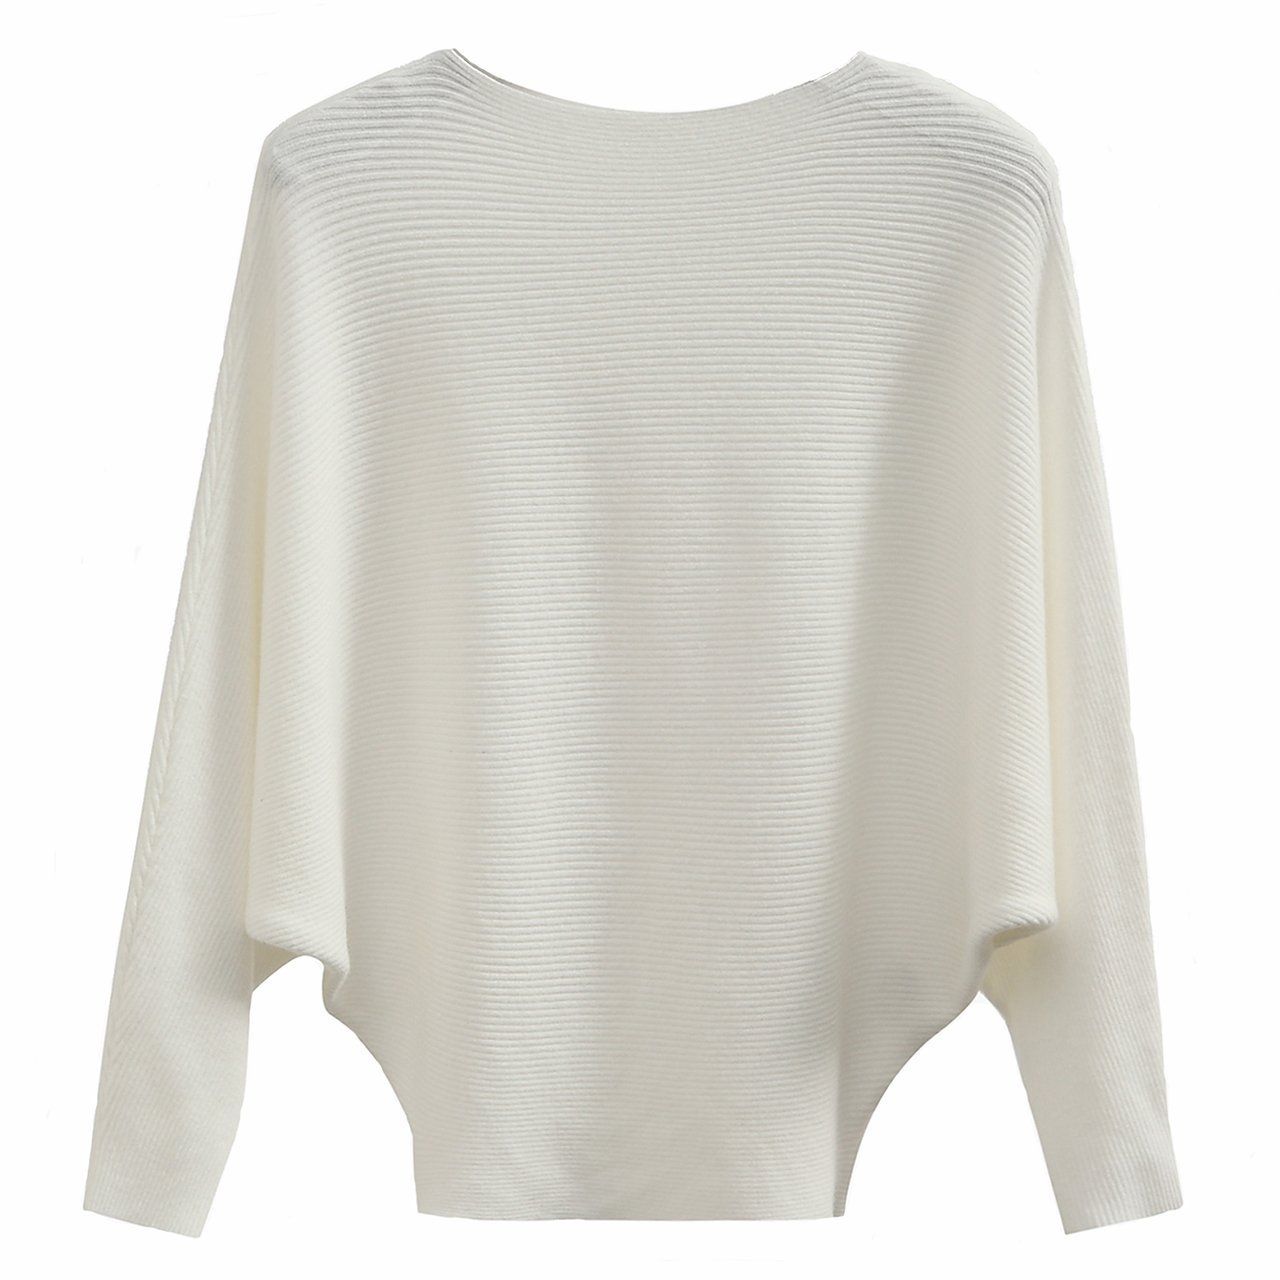 Boat Neck Batwing Sleeves Dolman Knitted Sweaters and Pullovers Tops for Women | Amazon (US)